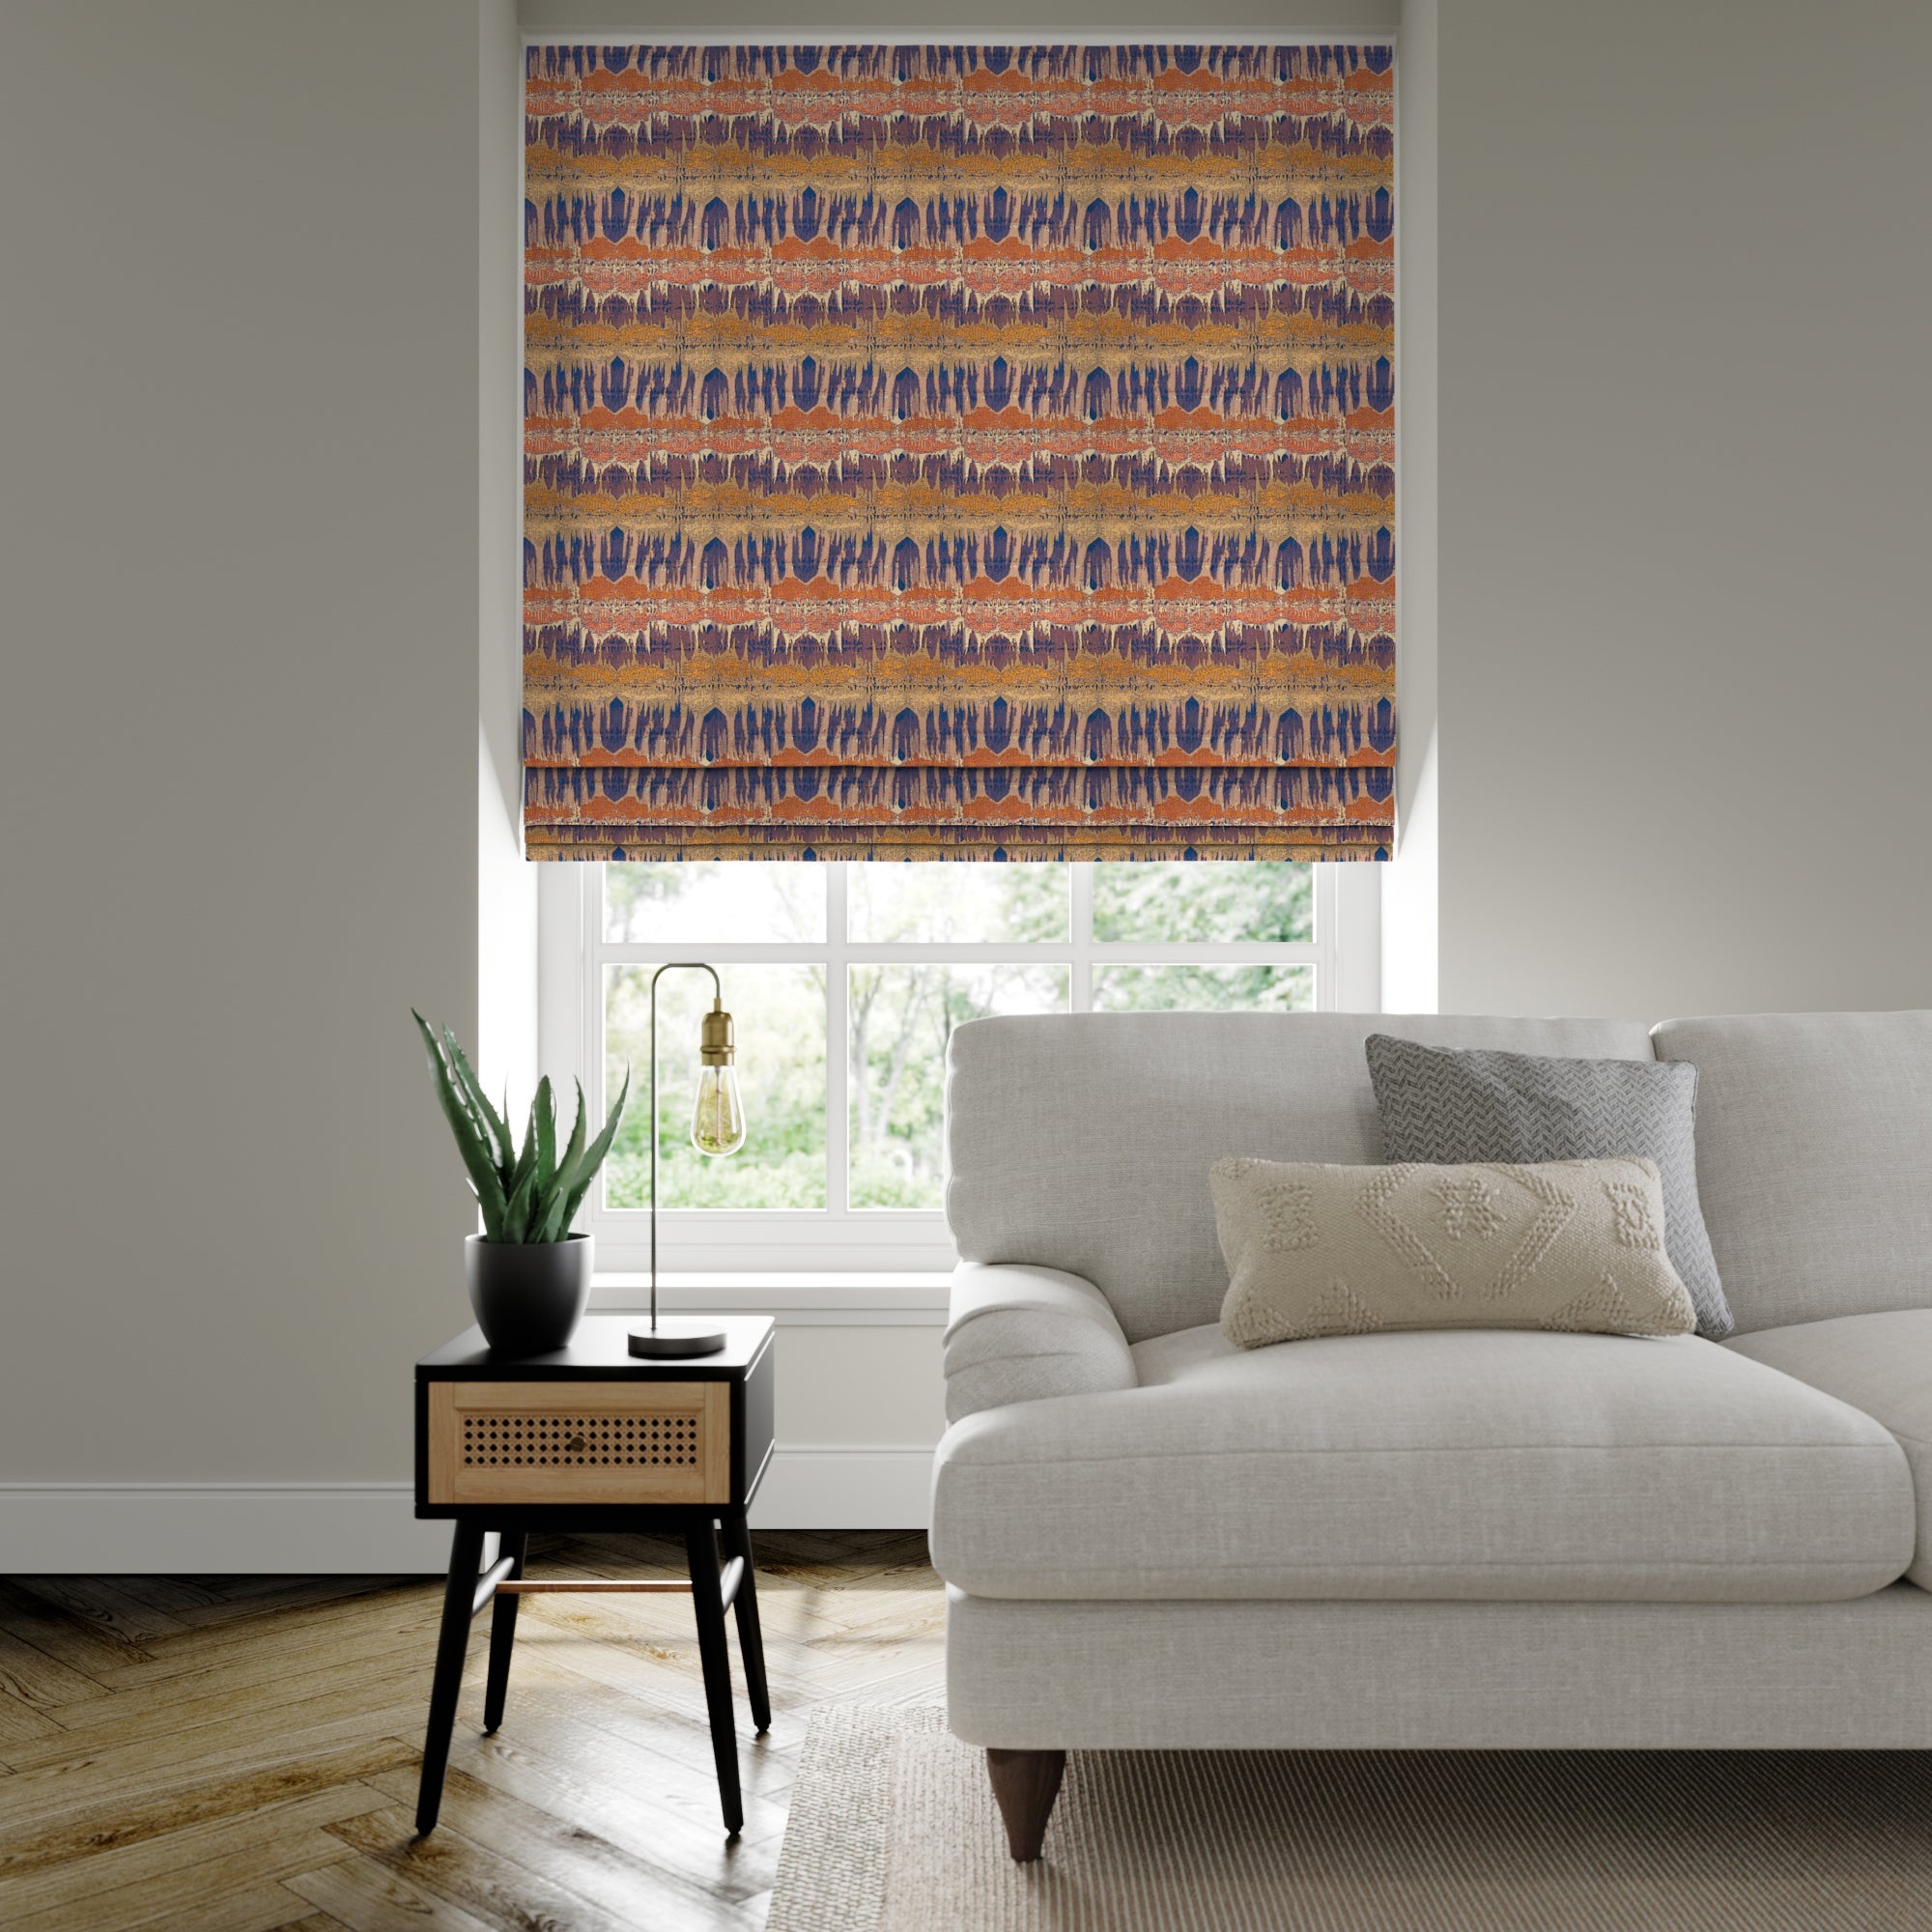 Budapest Made to Measure Roman Blind Budapest Midnight Spice